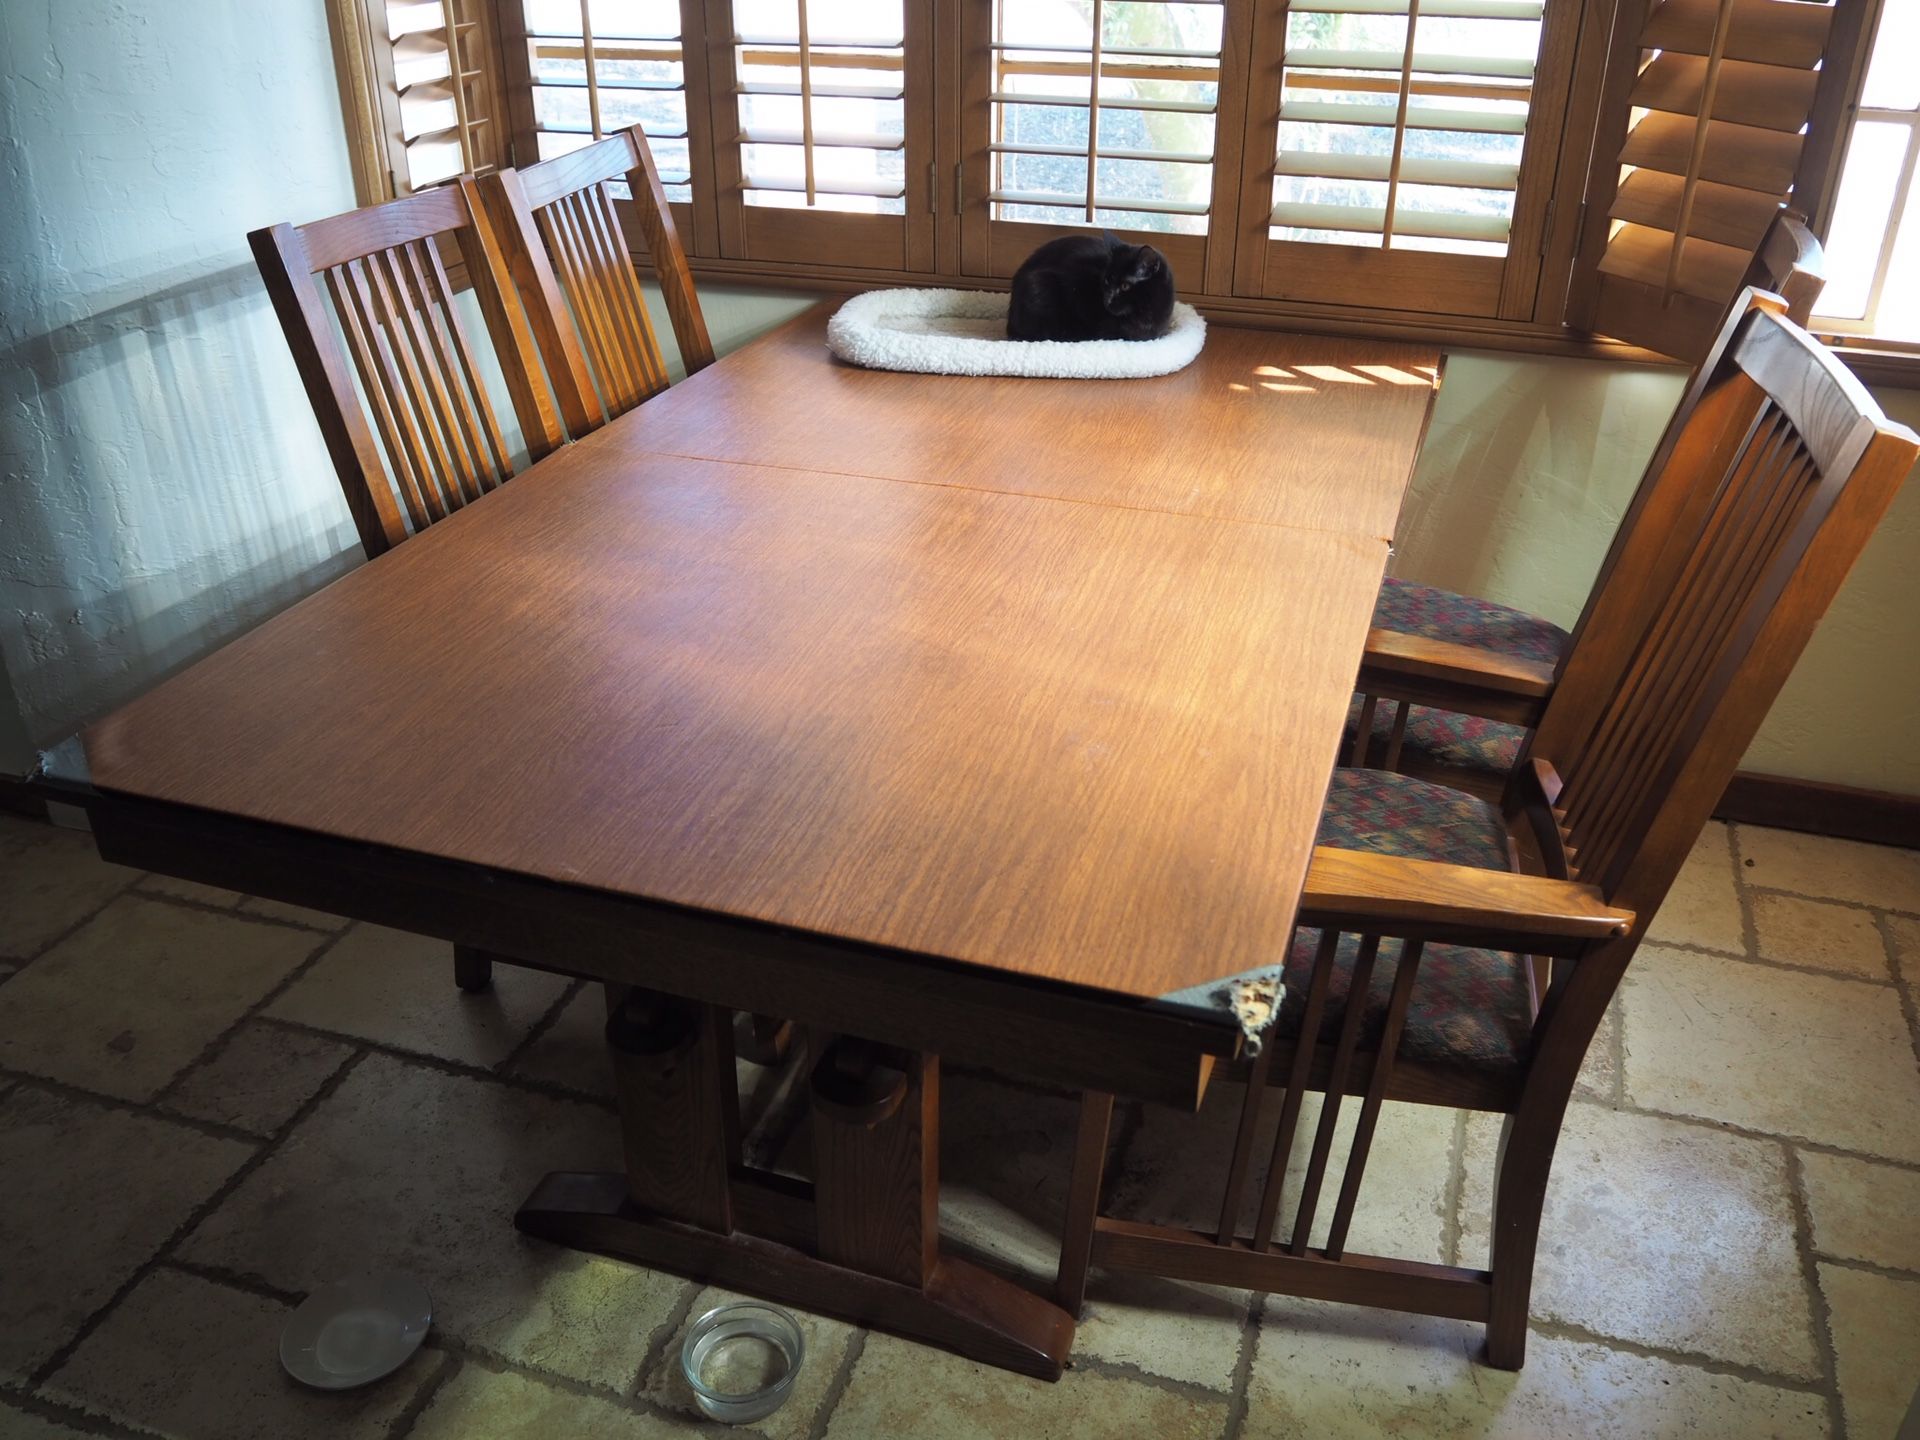 Antique Oak Craftsman Dining Table with Chairs (BEST OFFER, NEEDS TO GO)